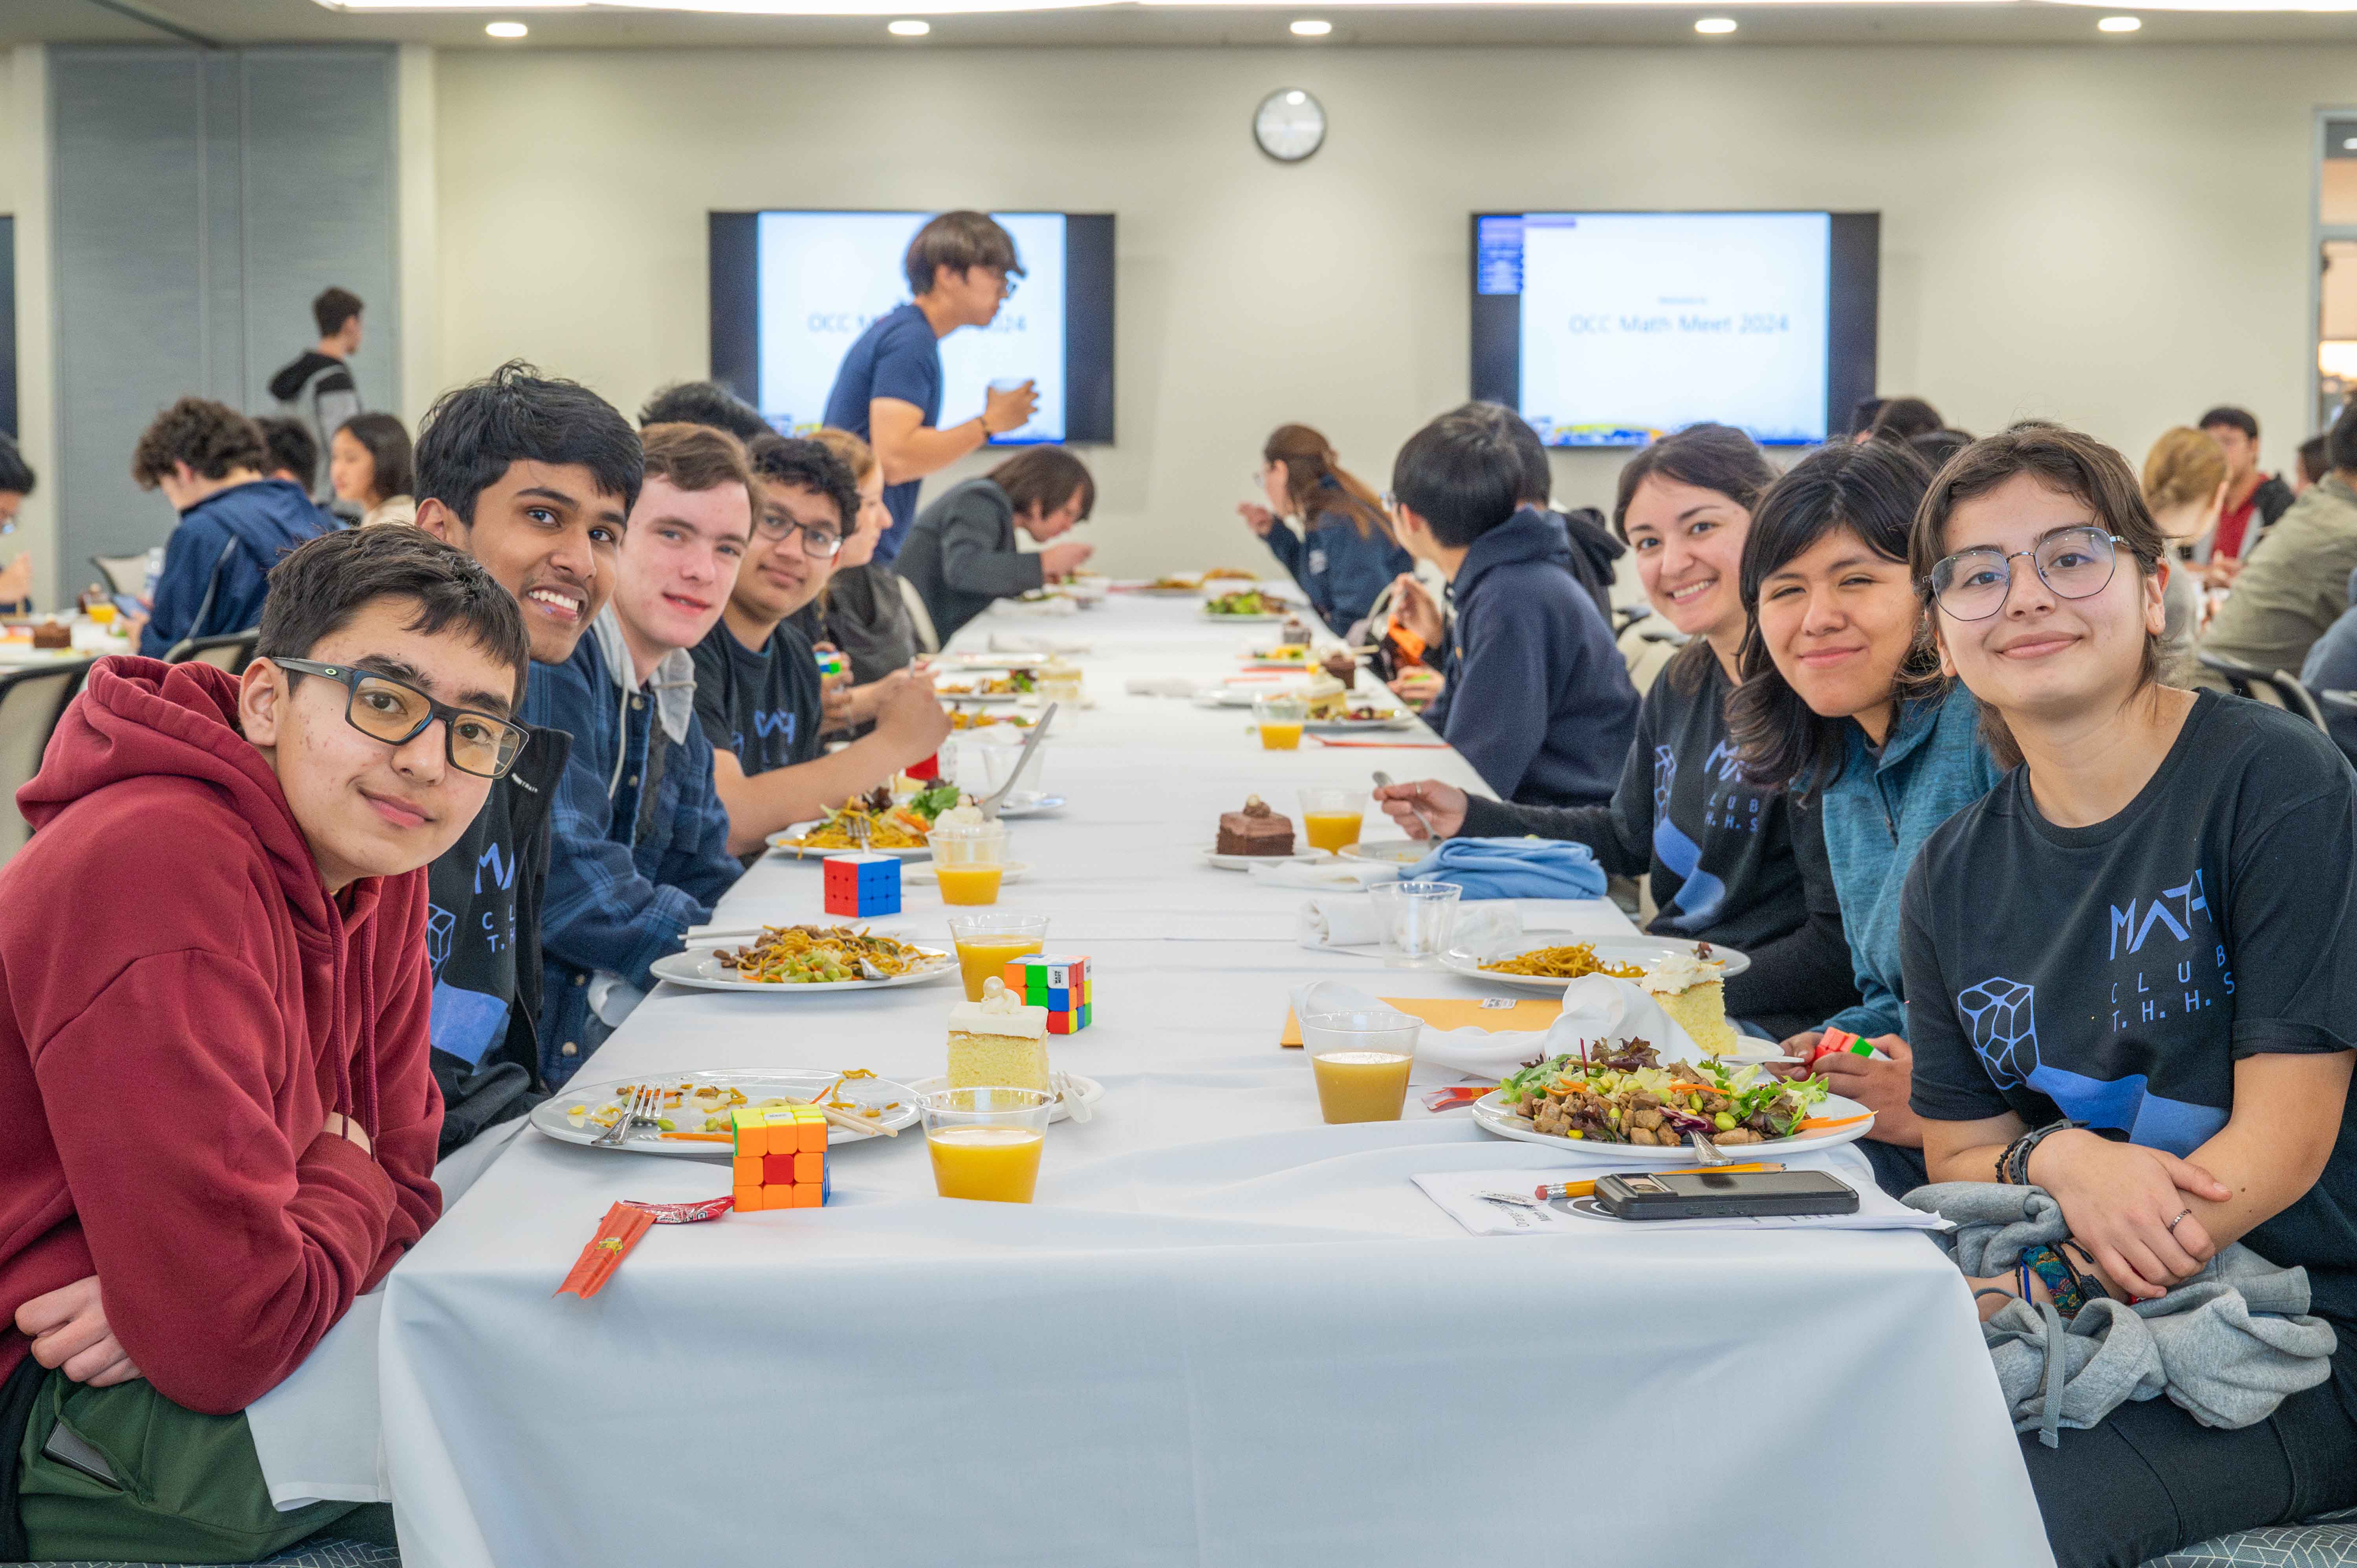 Students and advisors eat dinner while they await the results of the event